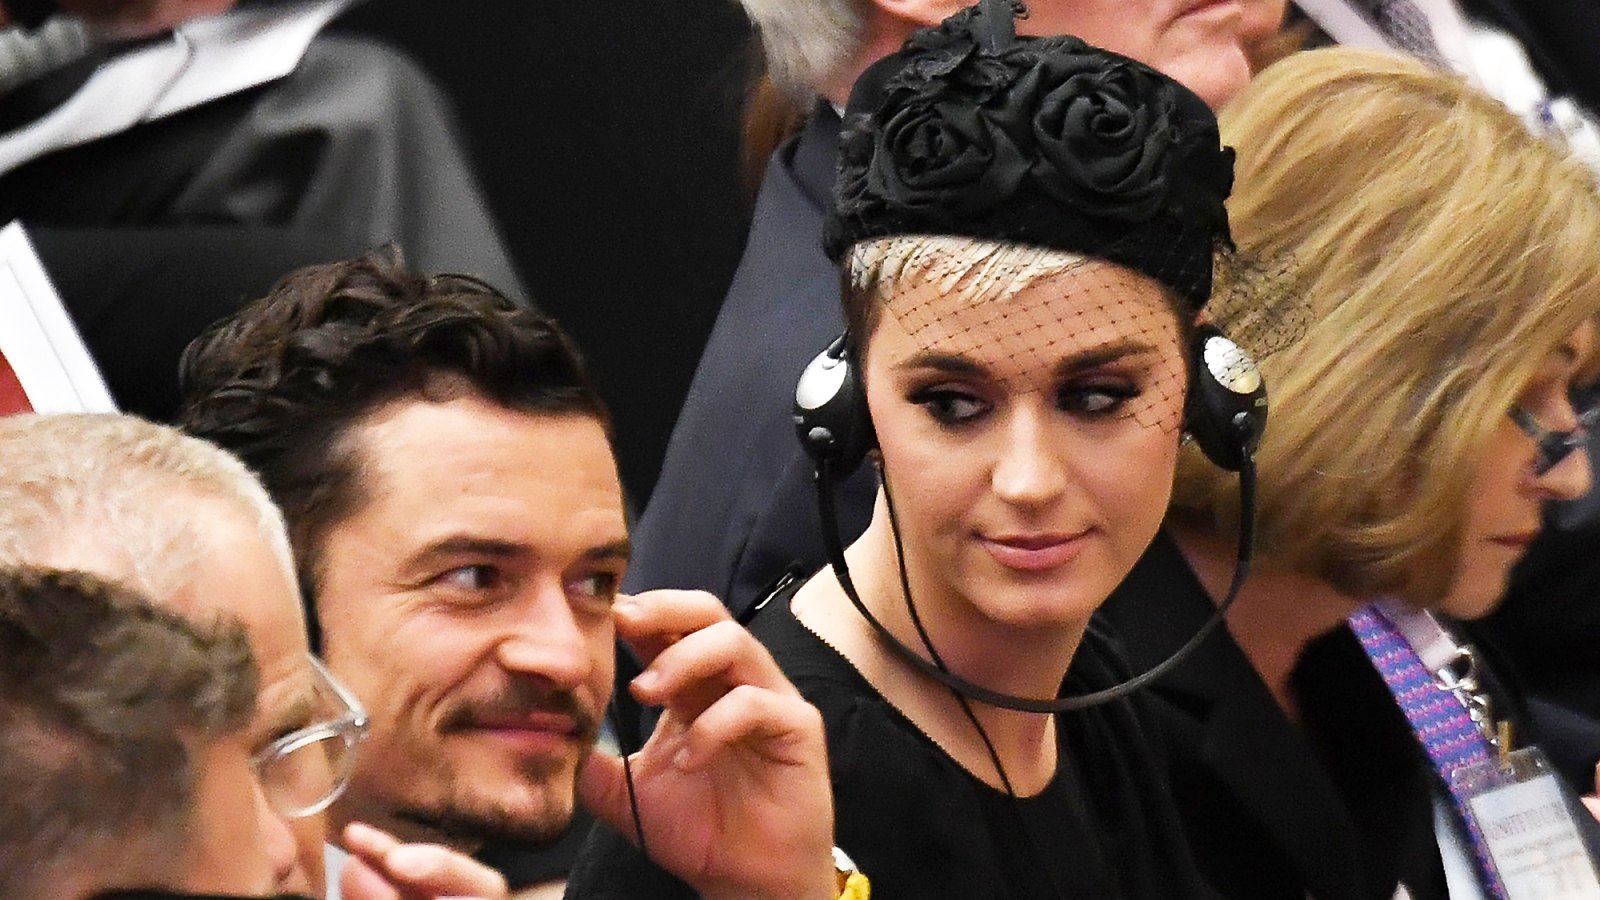 Katy Perry Wants to Grab Orlando Bloom Butt